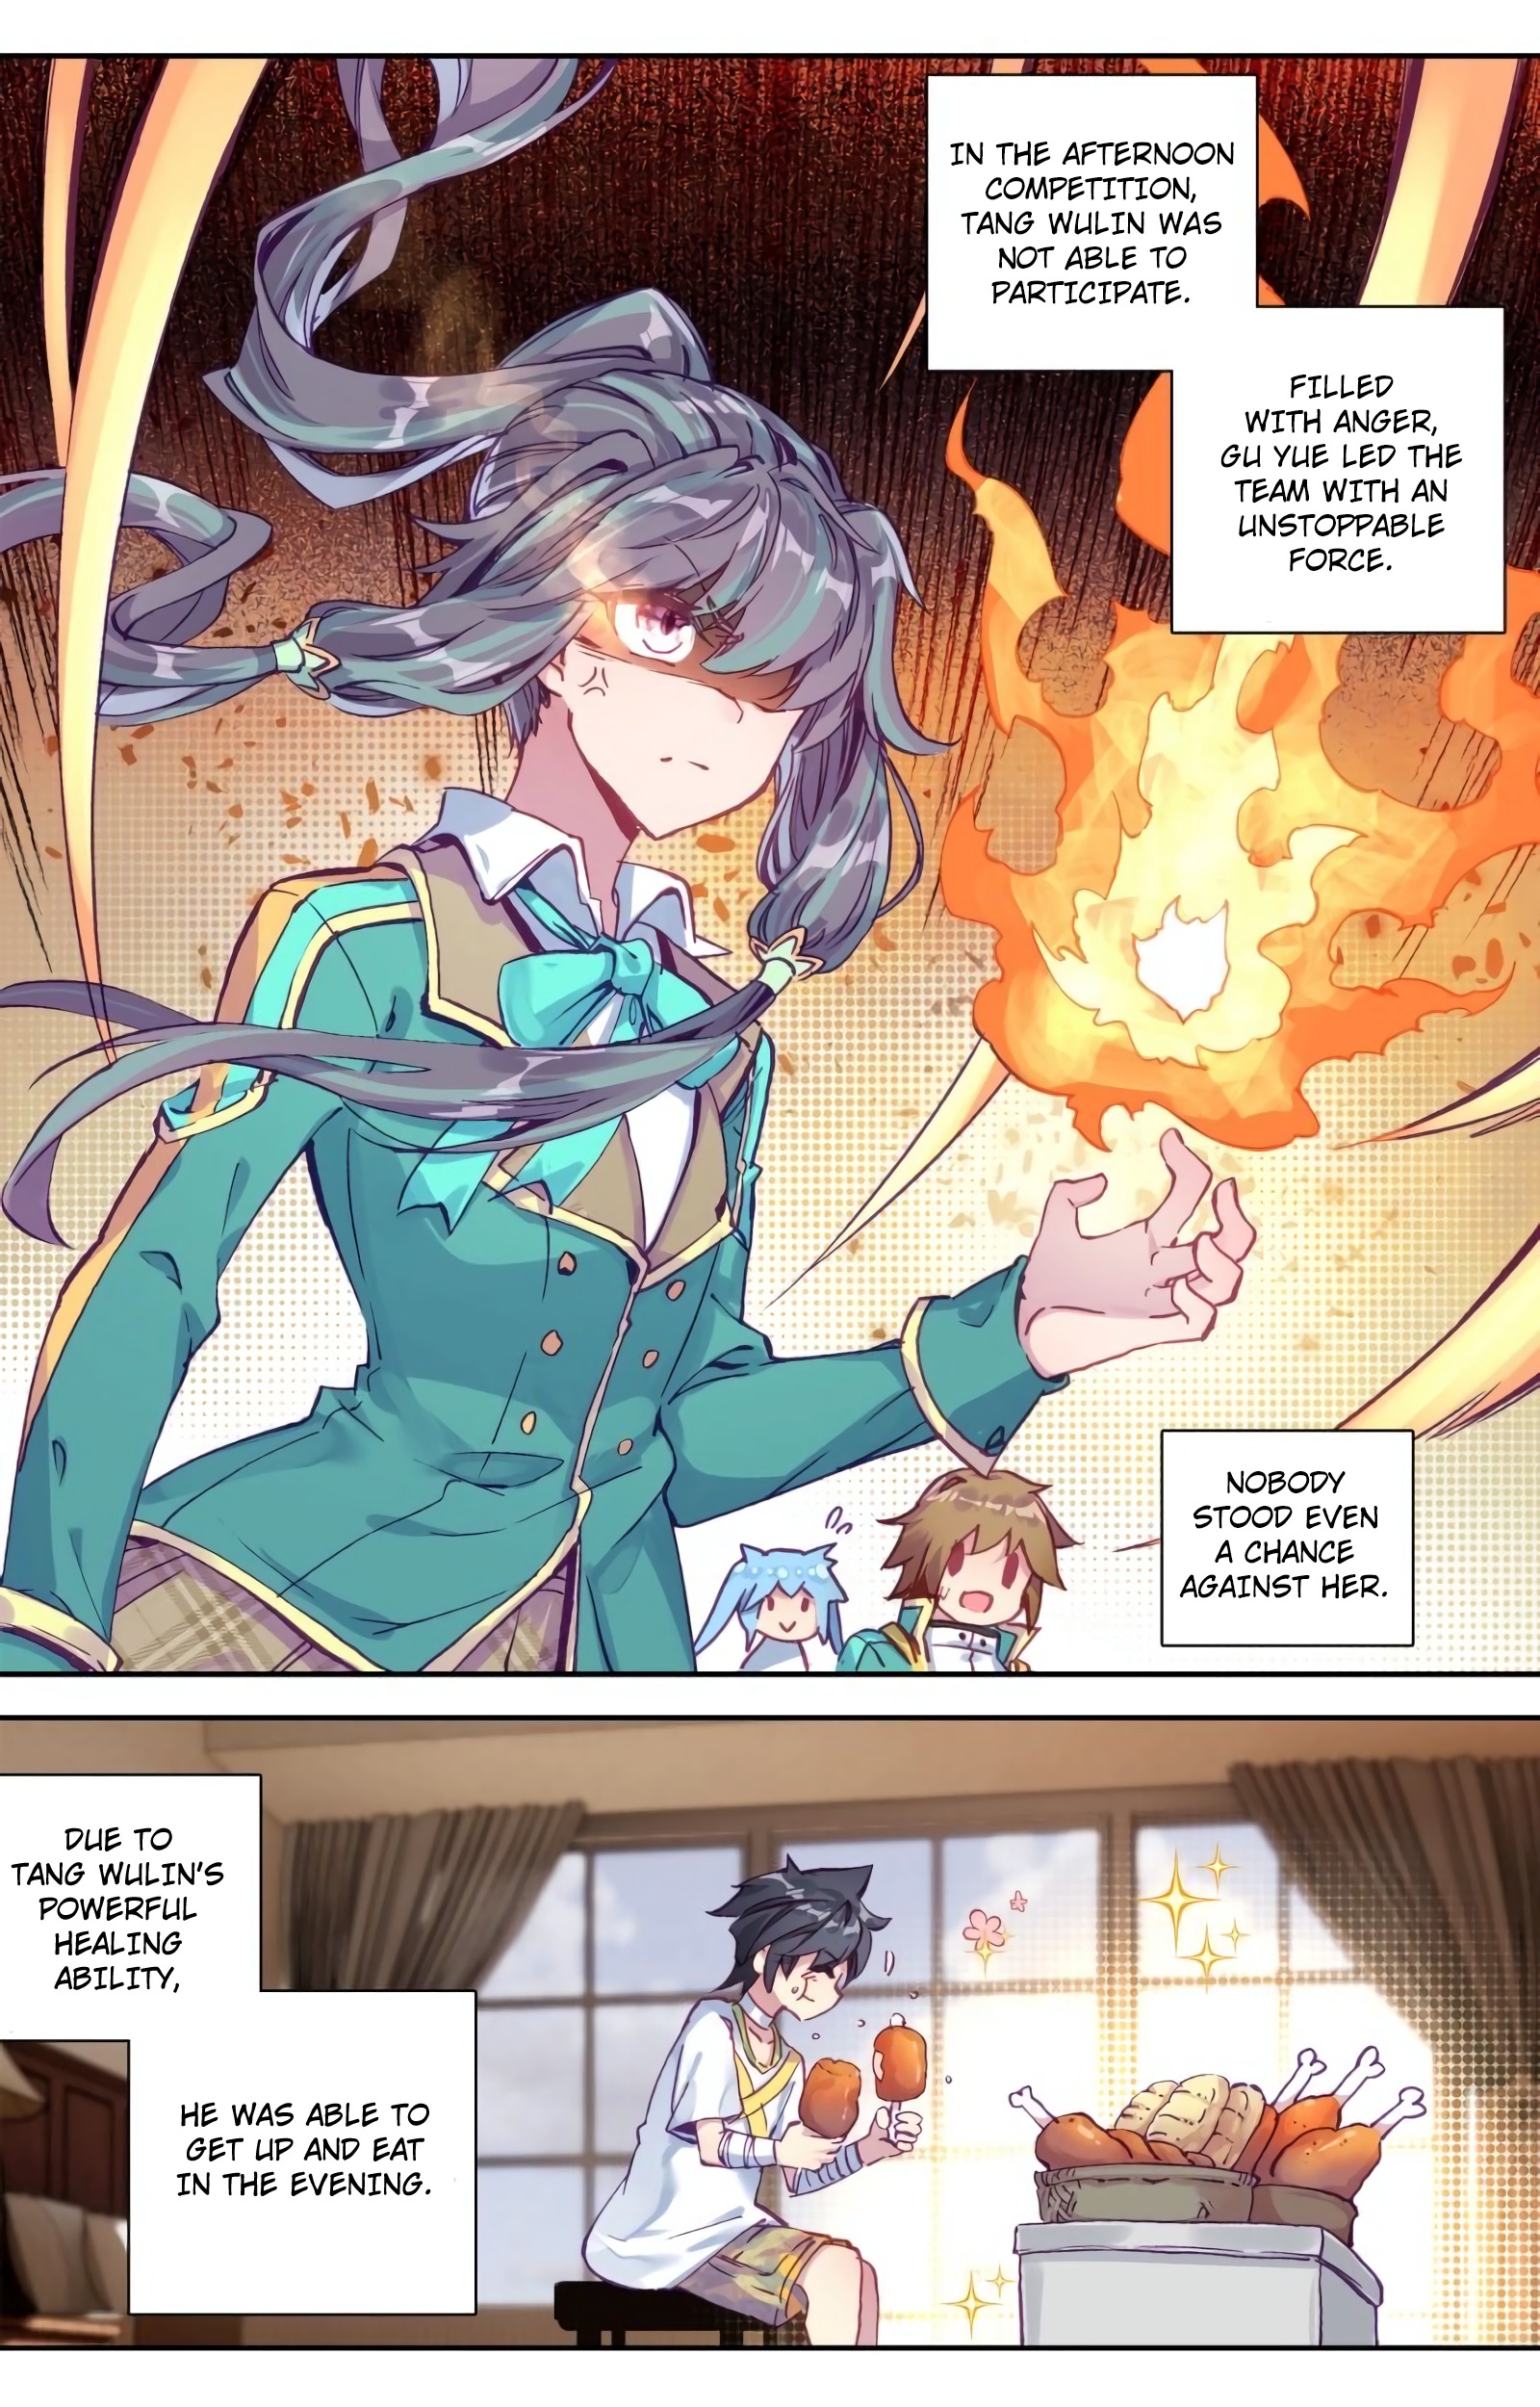 Soul Land III - The Legend of the Dragon King ch.123